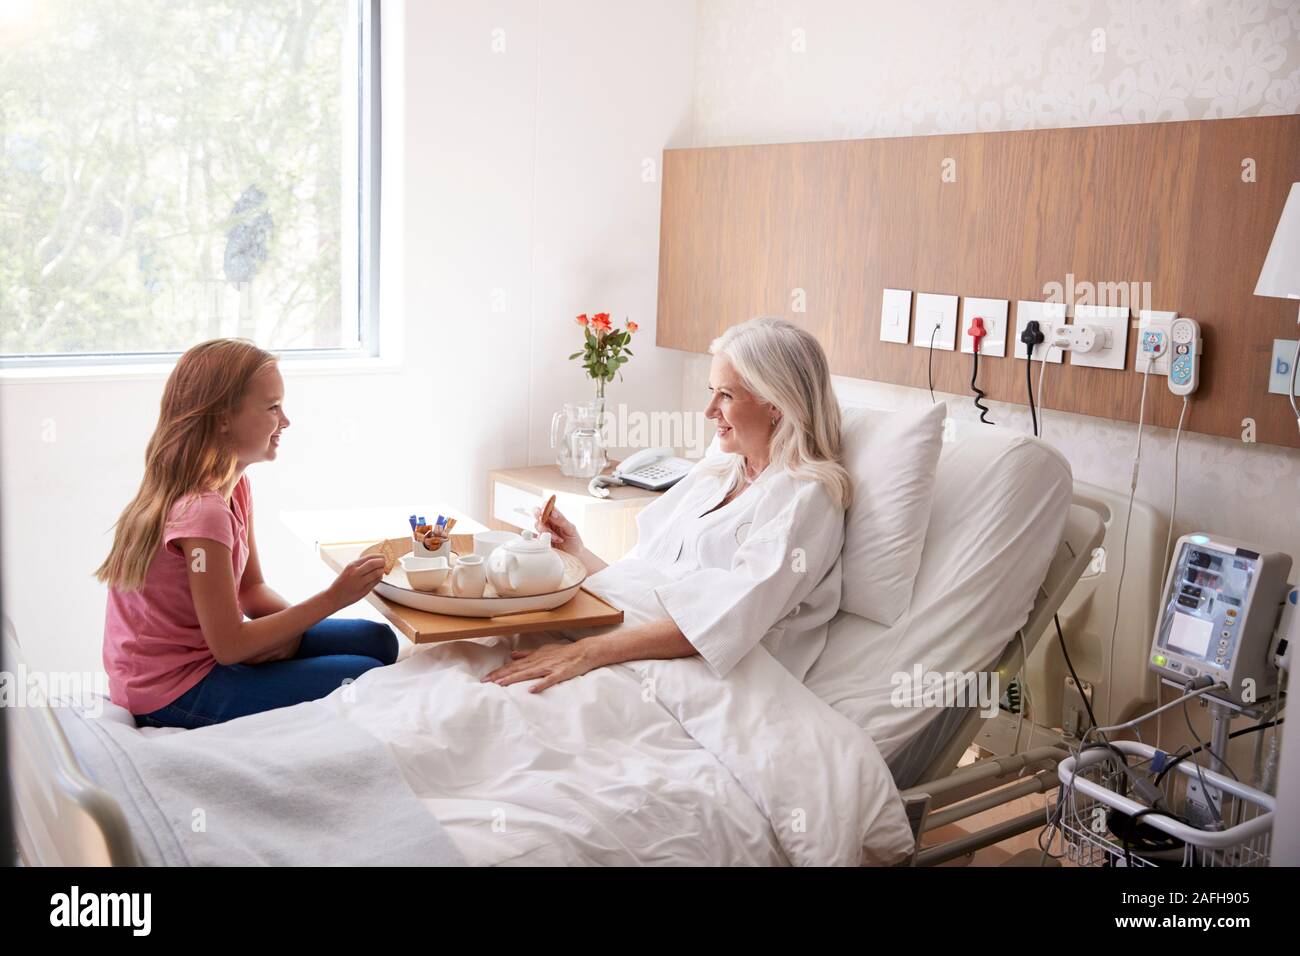 Granddaughter Visiting Grandmother In Hospital Bed For Afternoon Tea Stock Photo